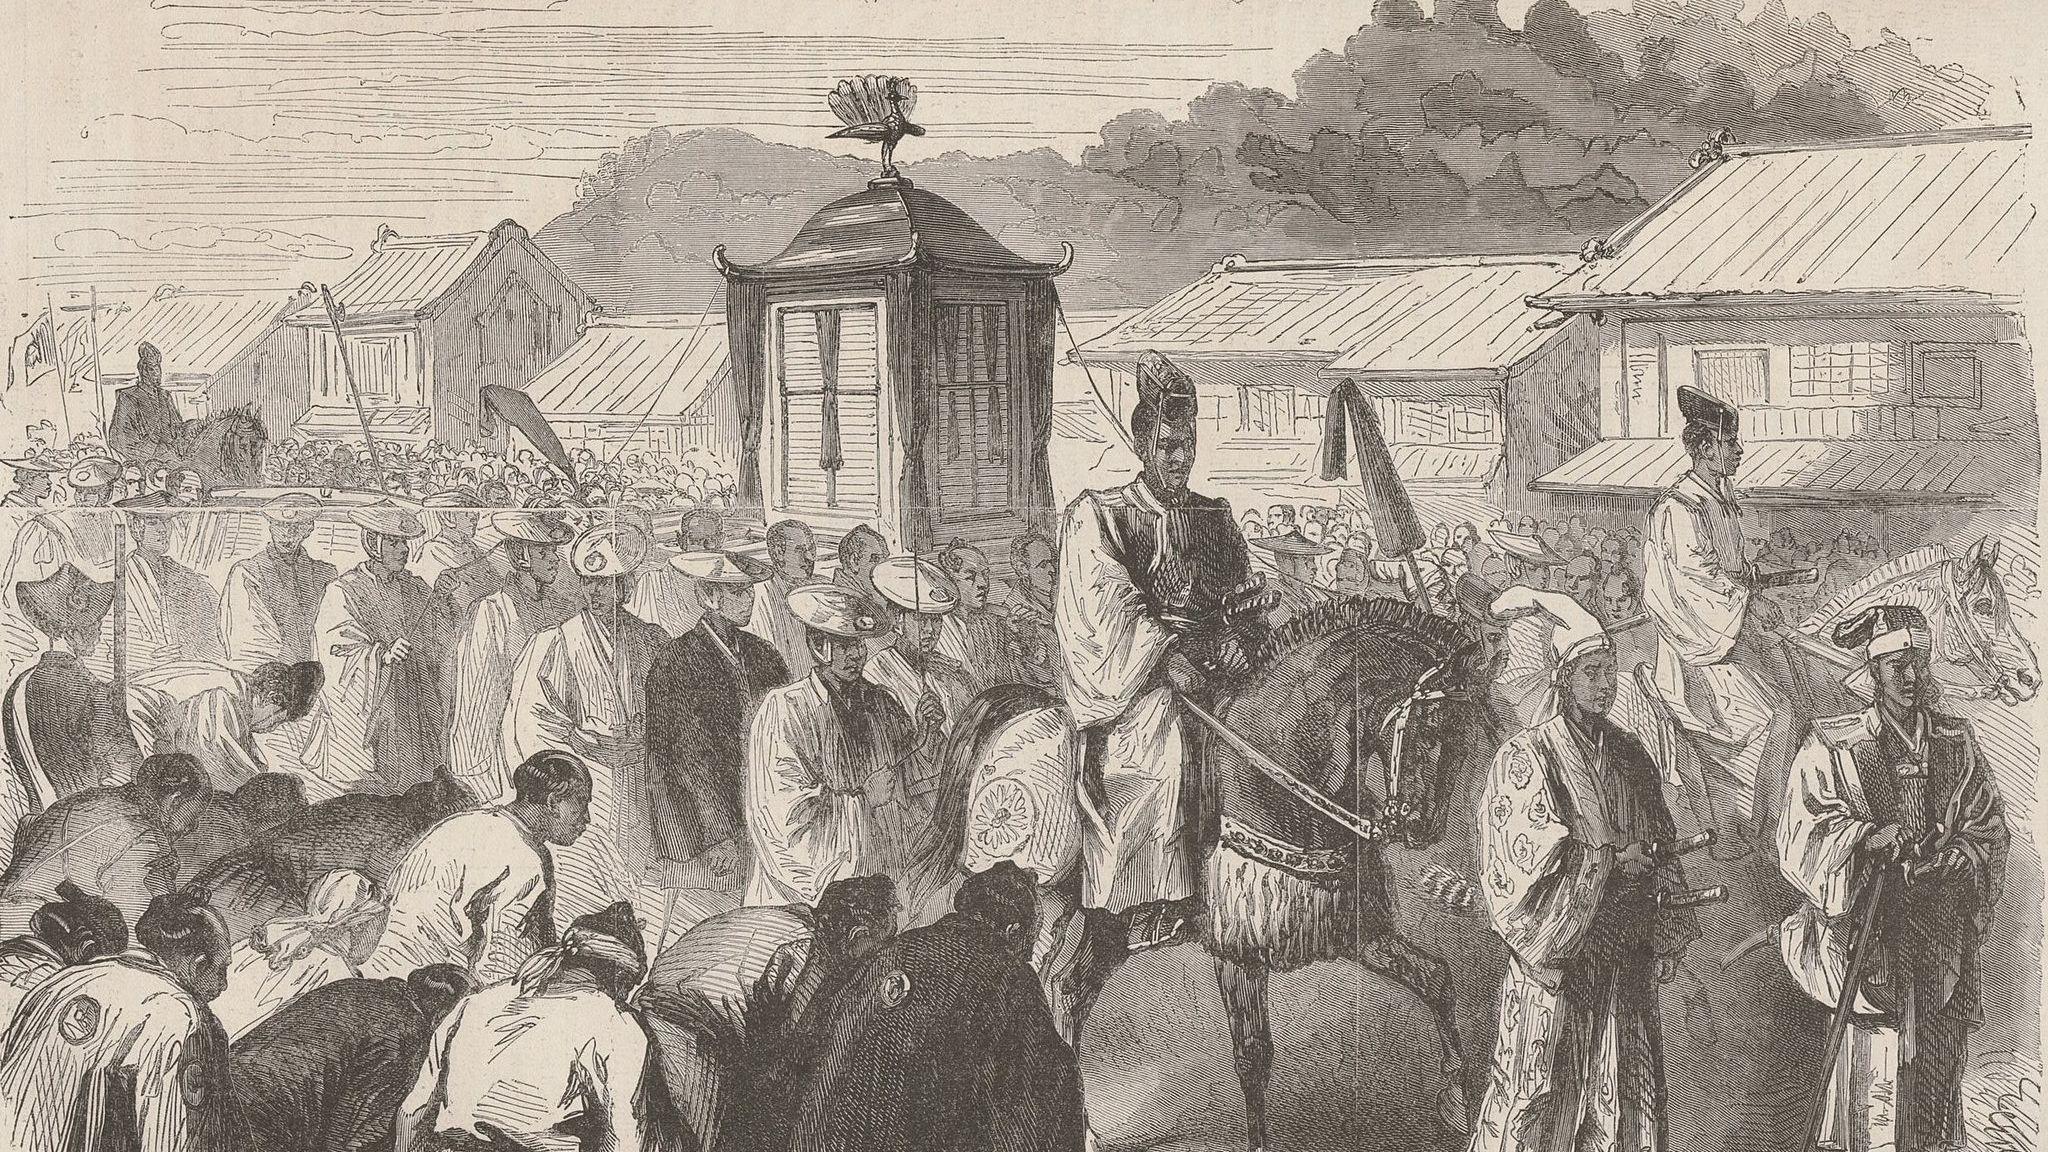 The fifteen-year-old Meiji Emperor, moving from Kyoto to Tokyo at the end of 1868, after the fall of Edo